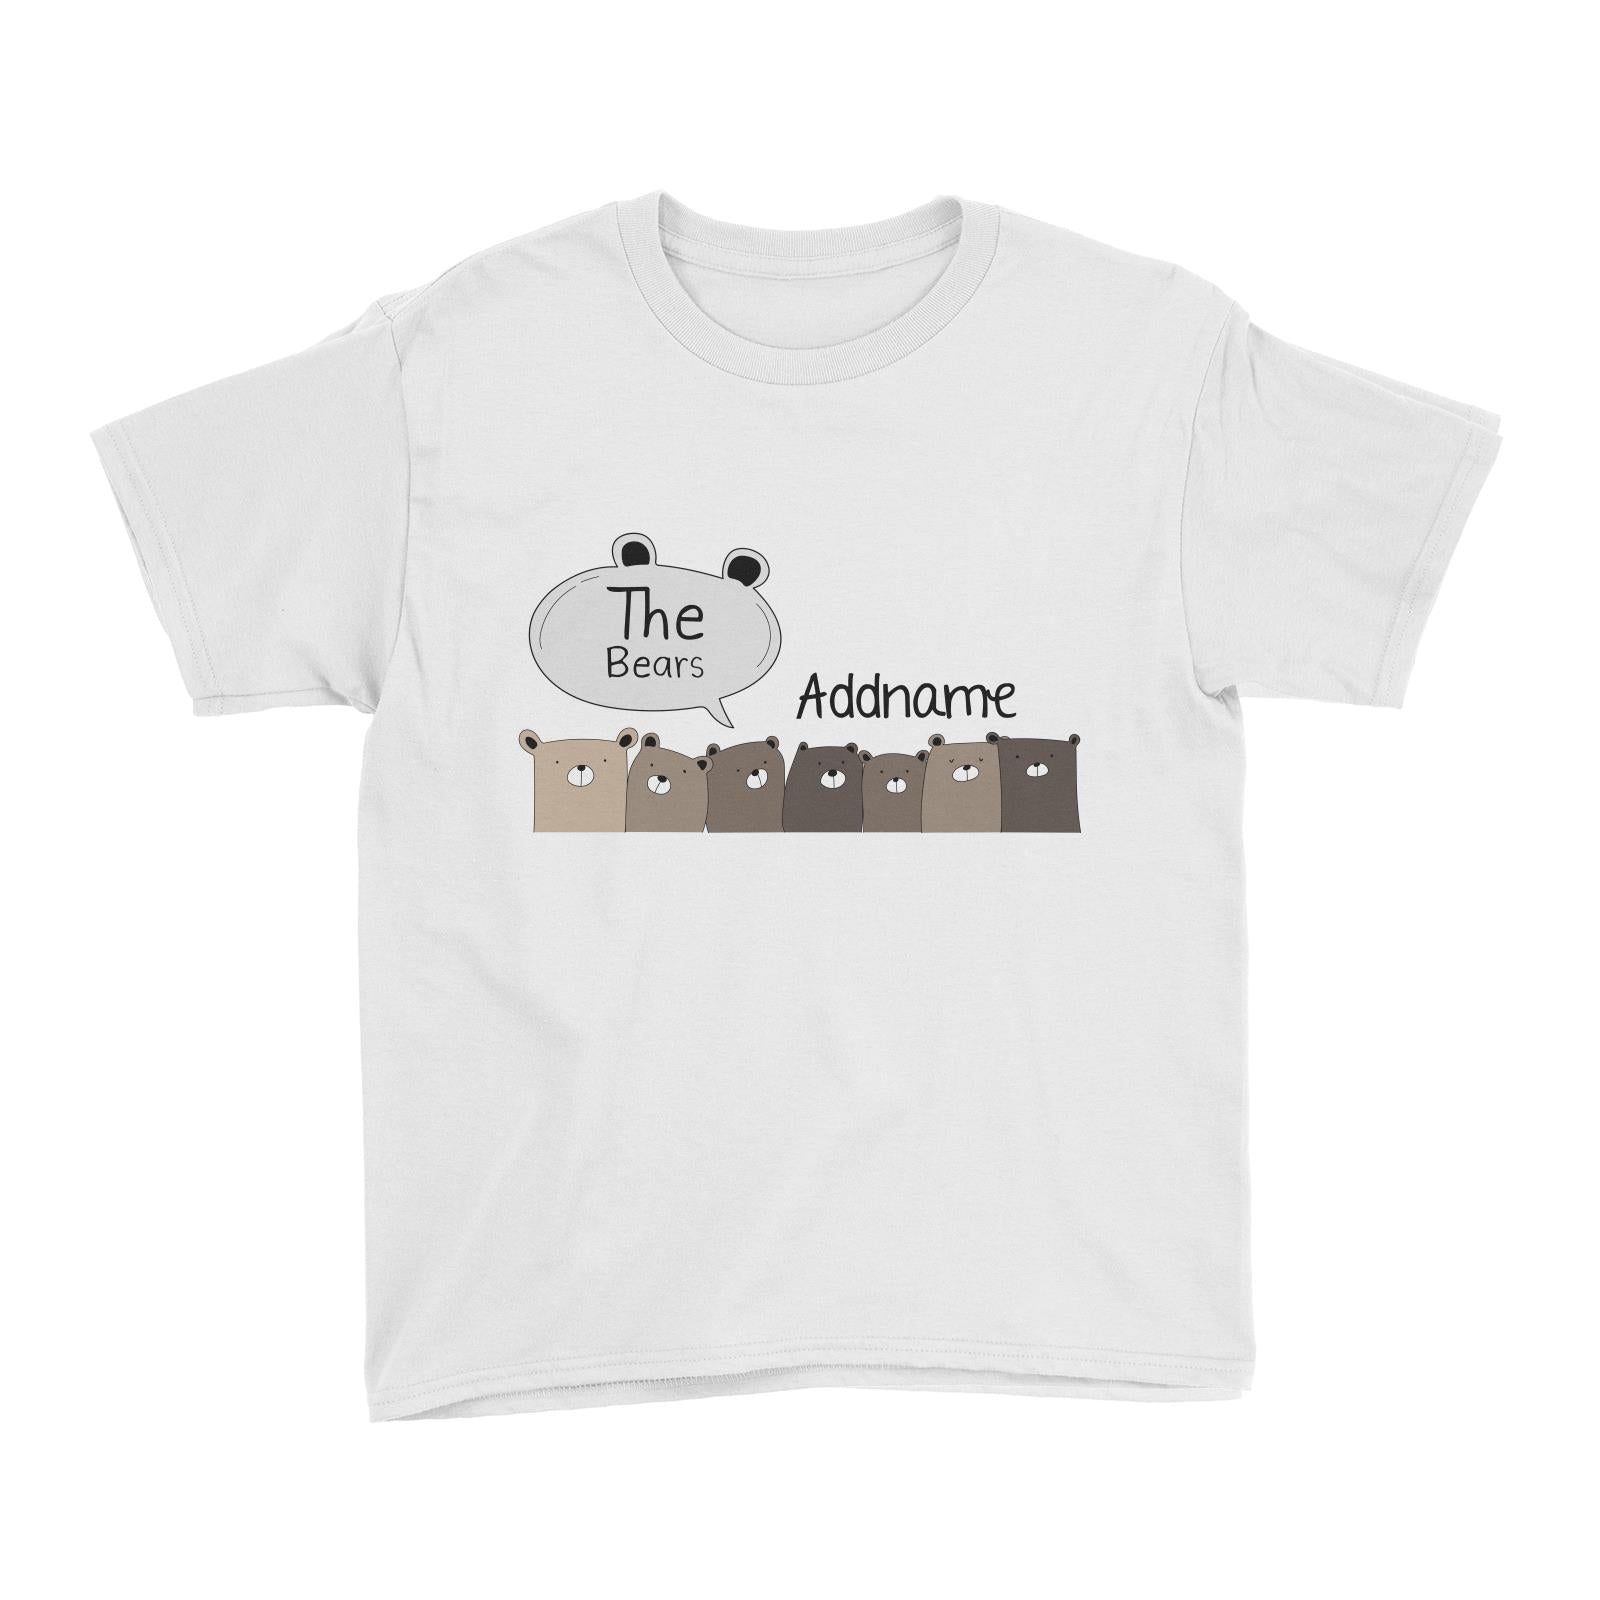 Cute Animals And Friends Series The Bears Group Addname Kid's T-Shirt